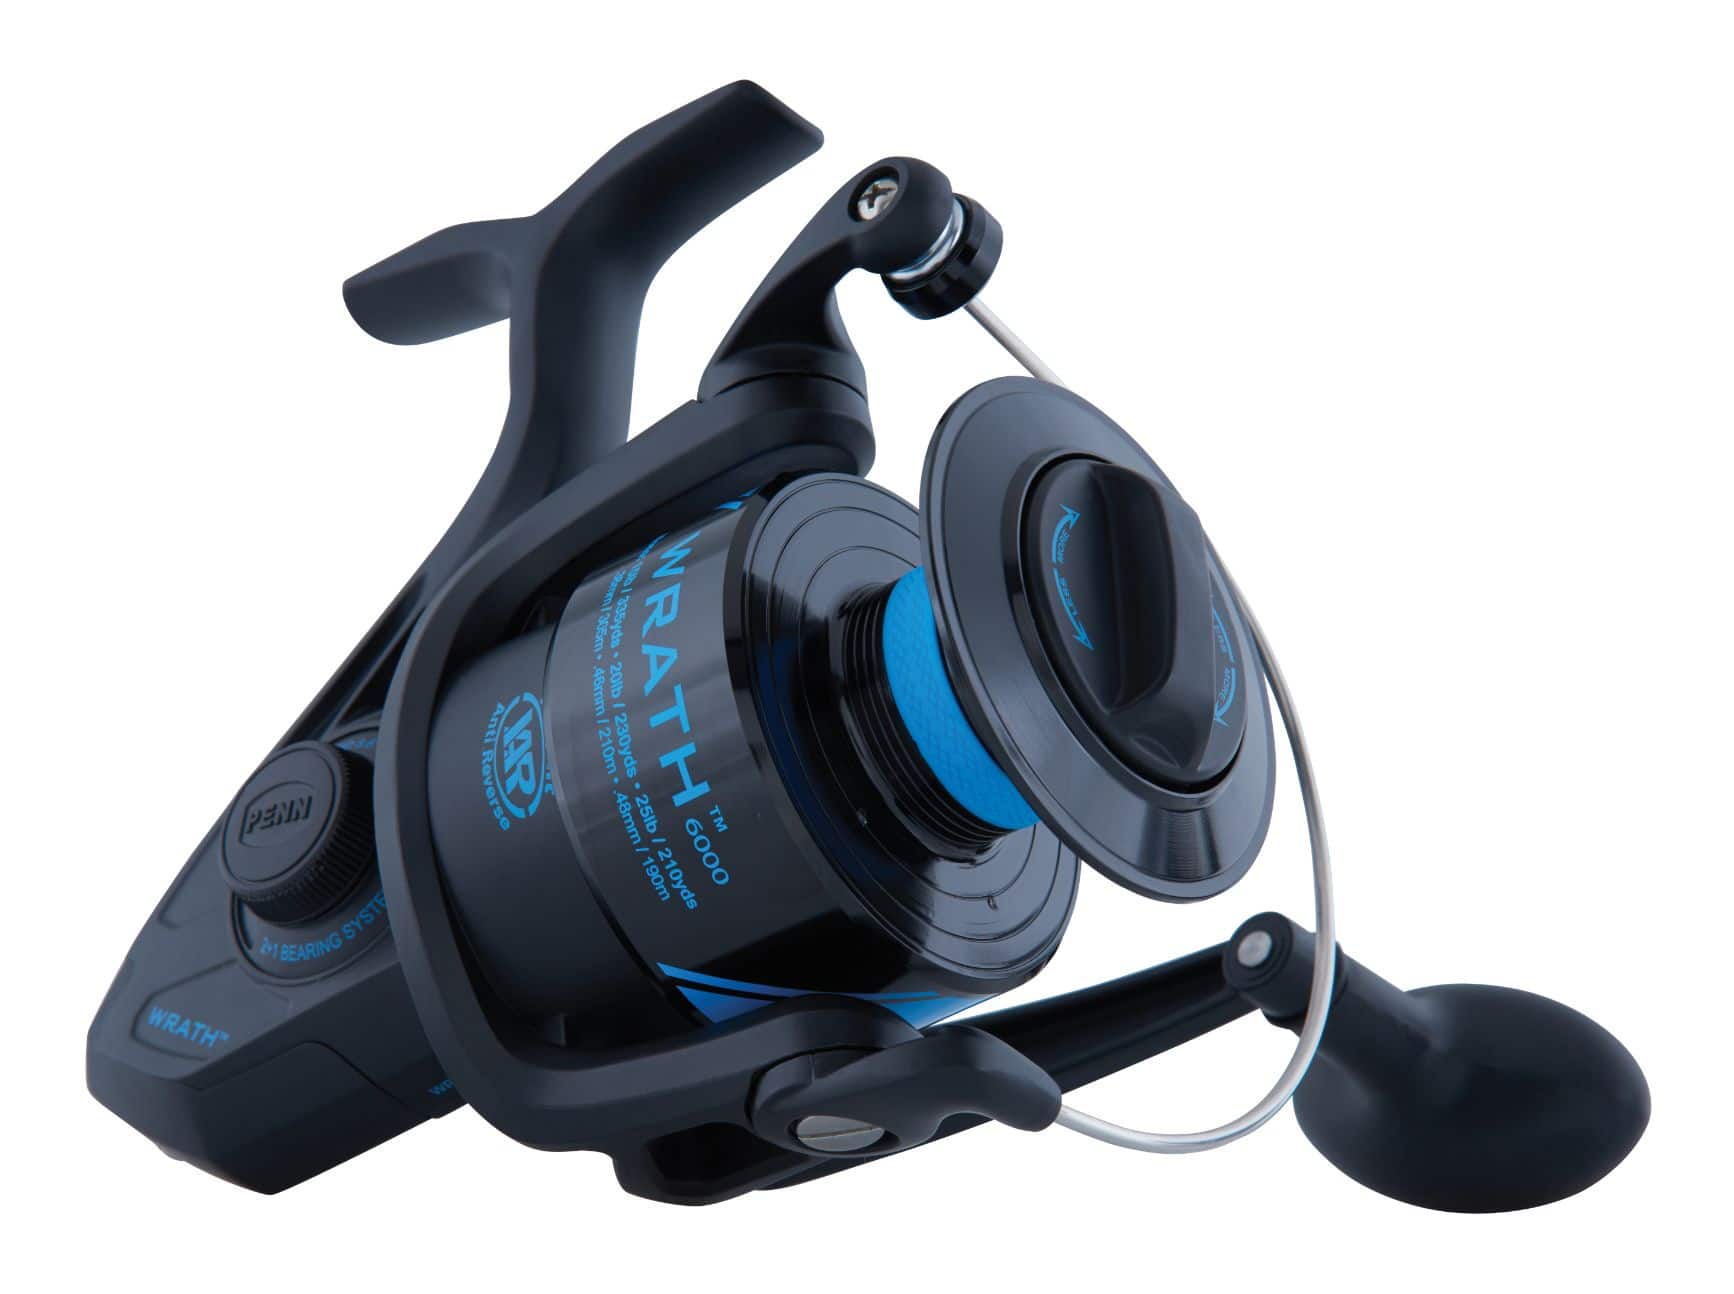 Penn Saltwater Fishing Reels with Low Profile Baitcast Reel for